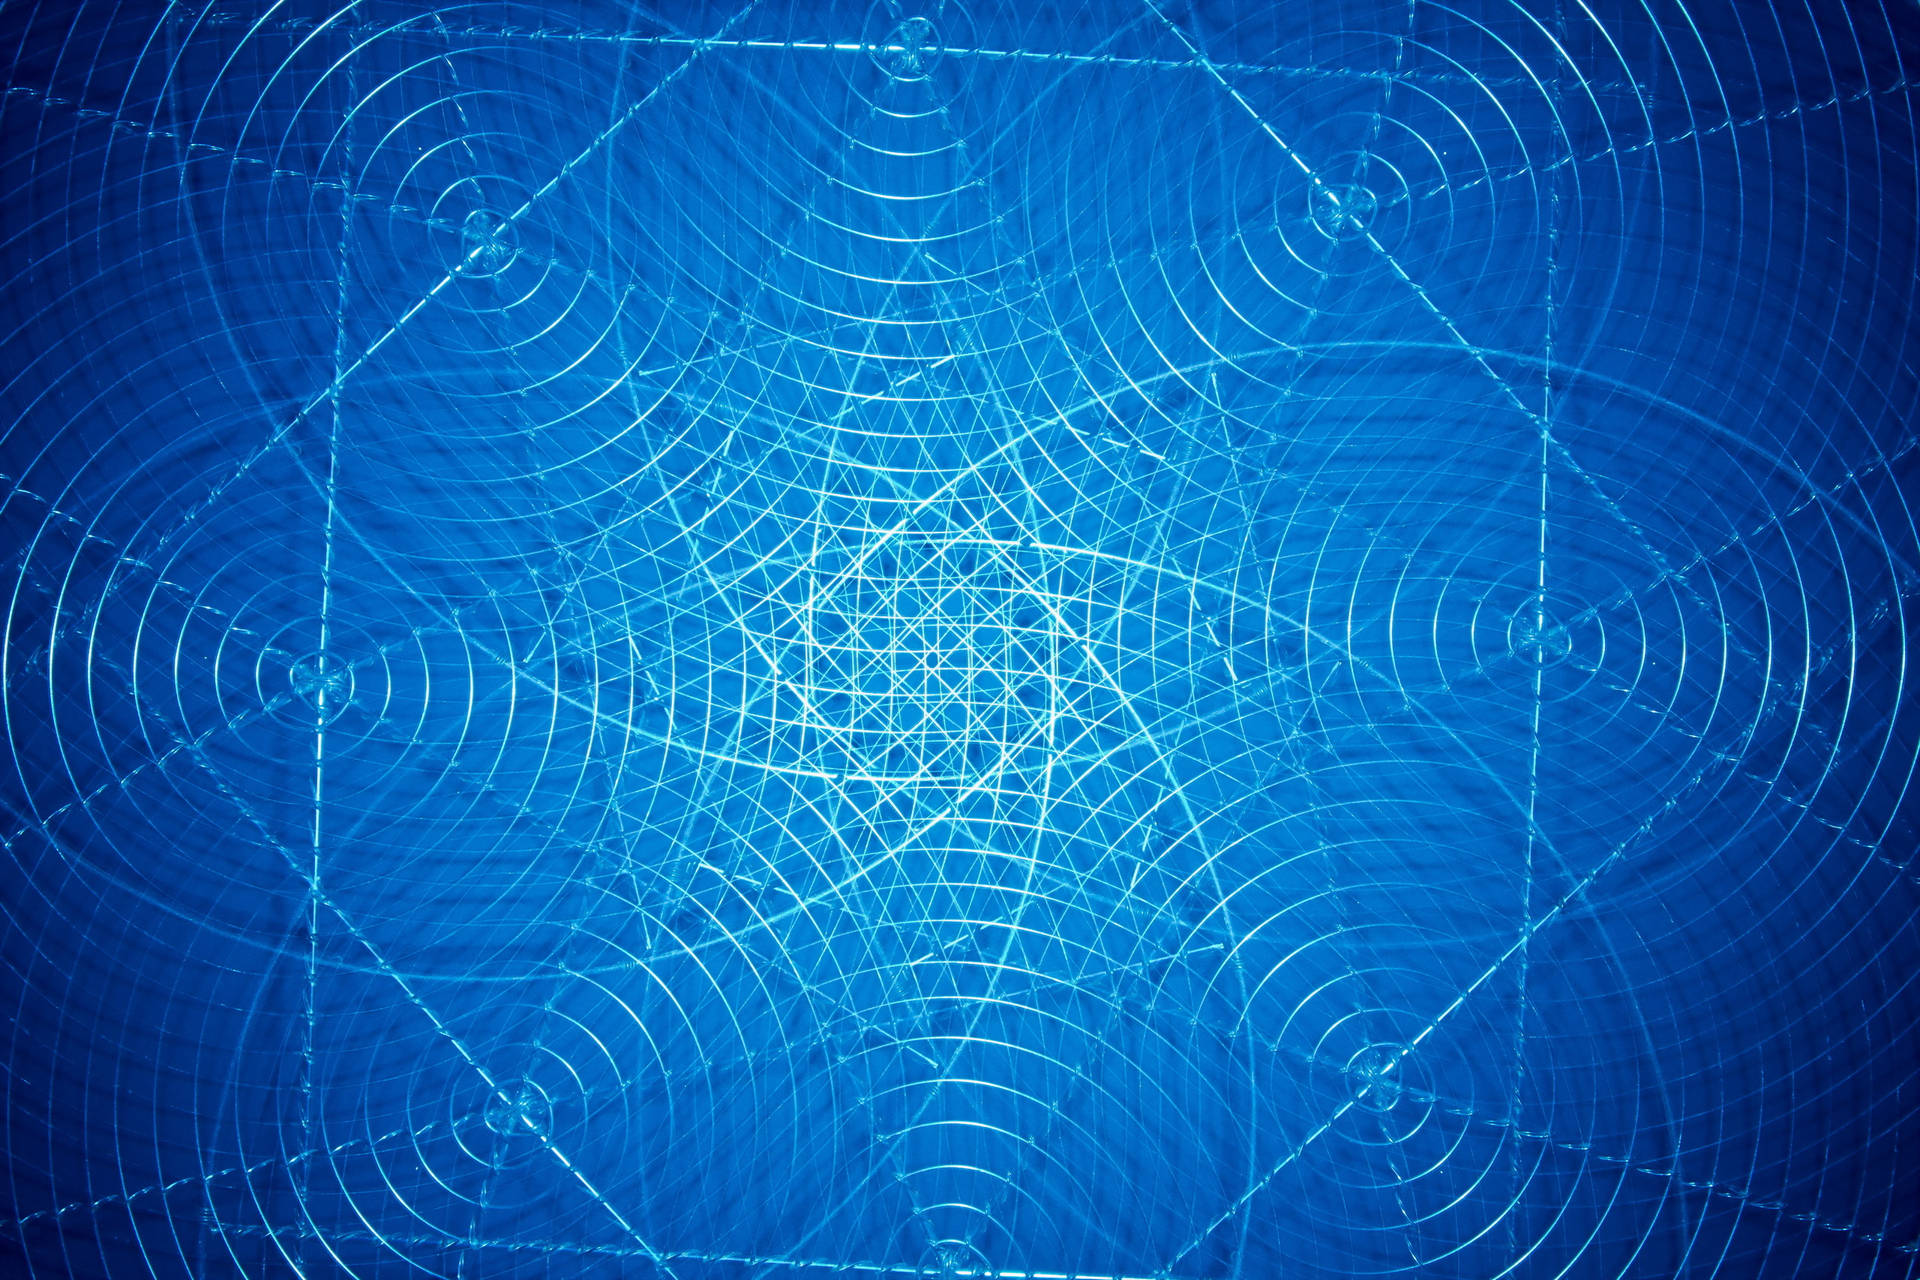 Abstract Blue Geometric Patterns